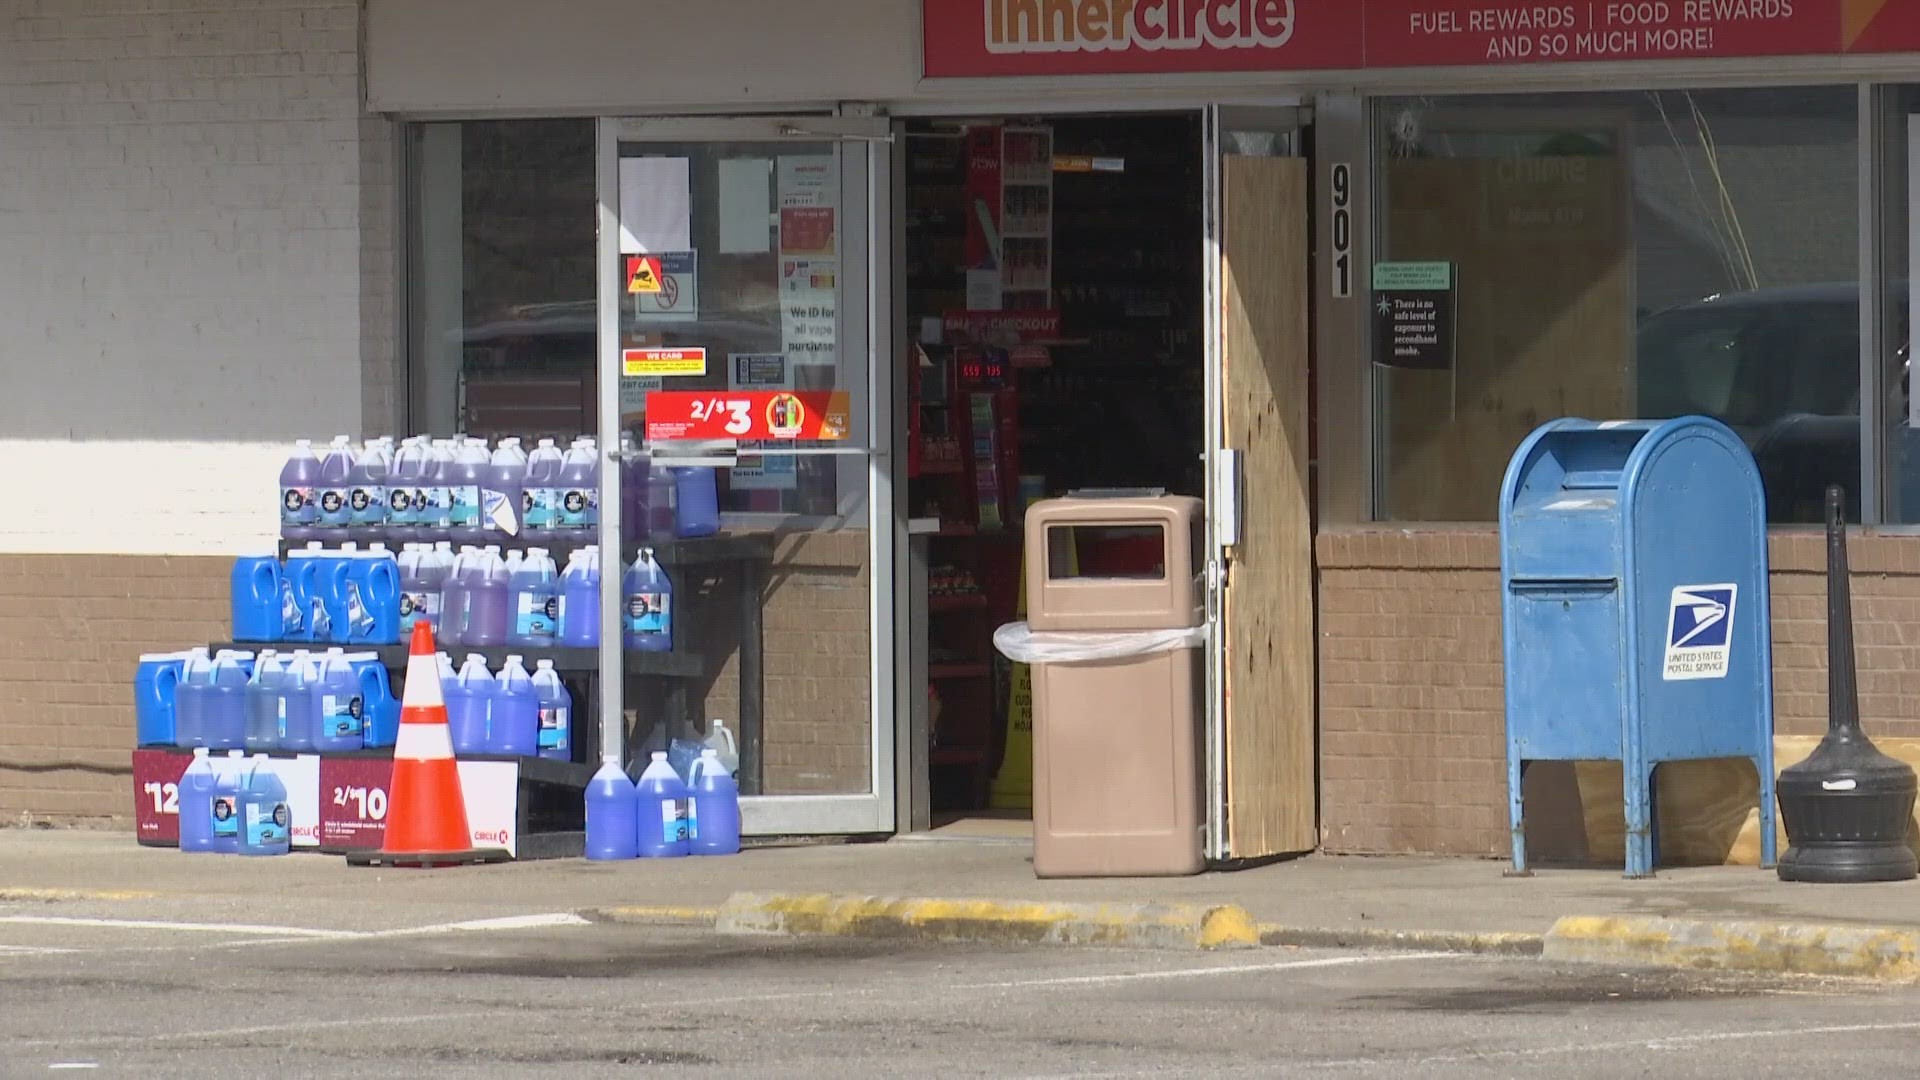 The shooting happened around 8 p.m. March 11 at the Circle K near East Bradford and Pennsylvania streets.